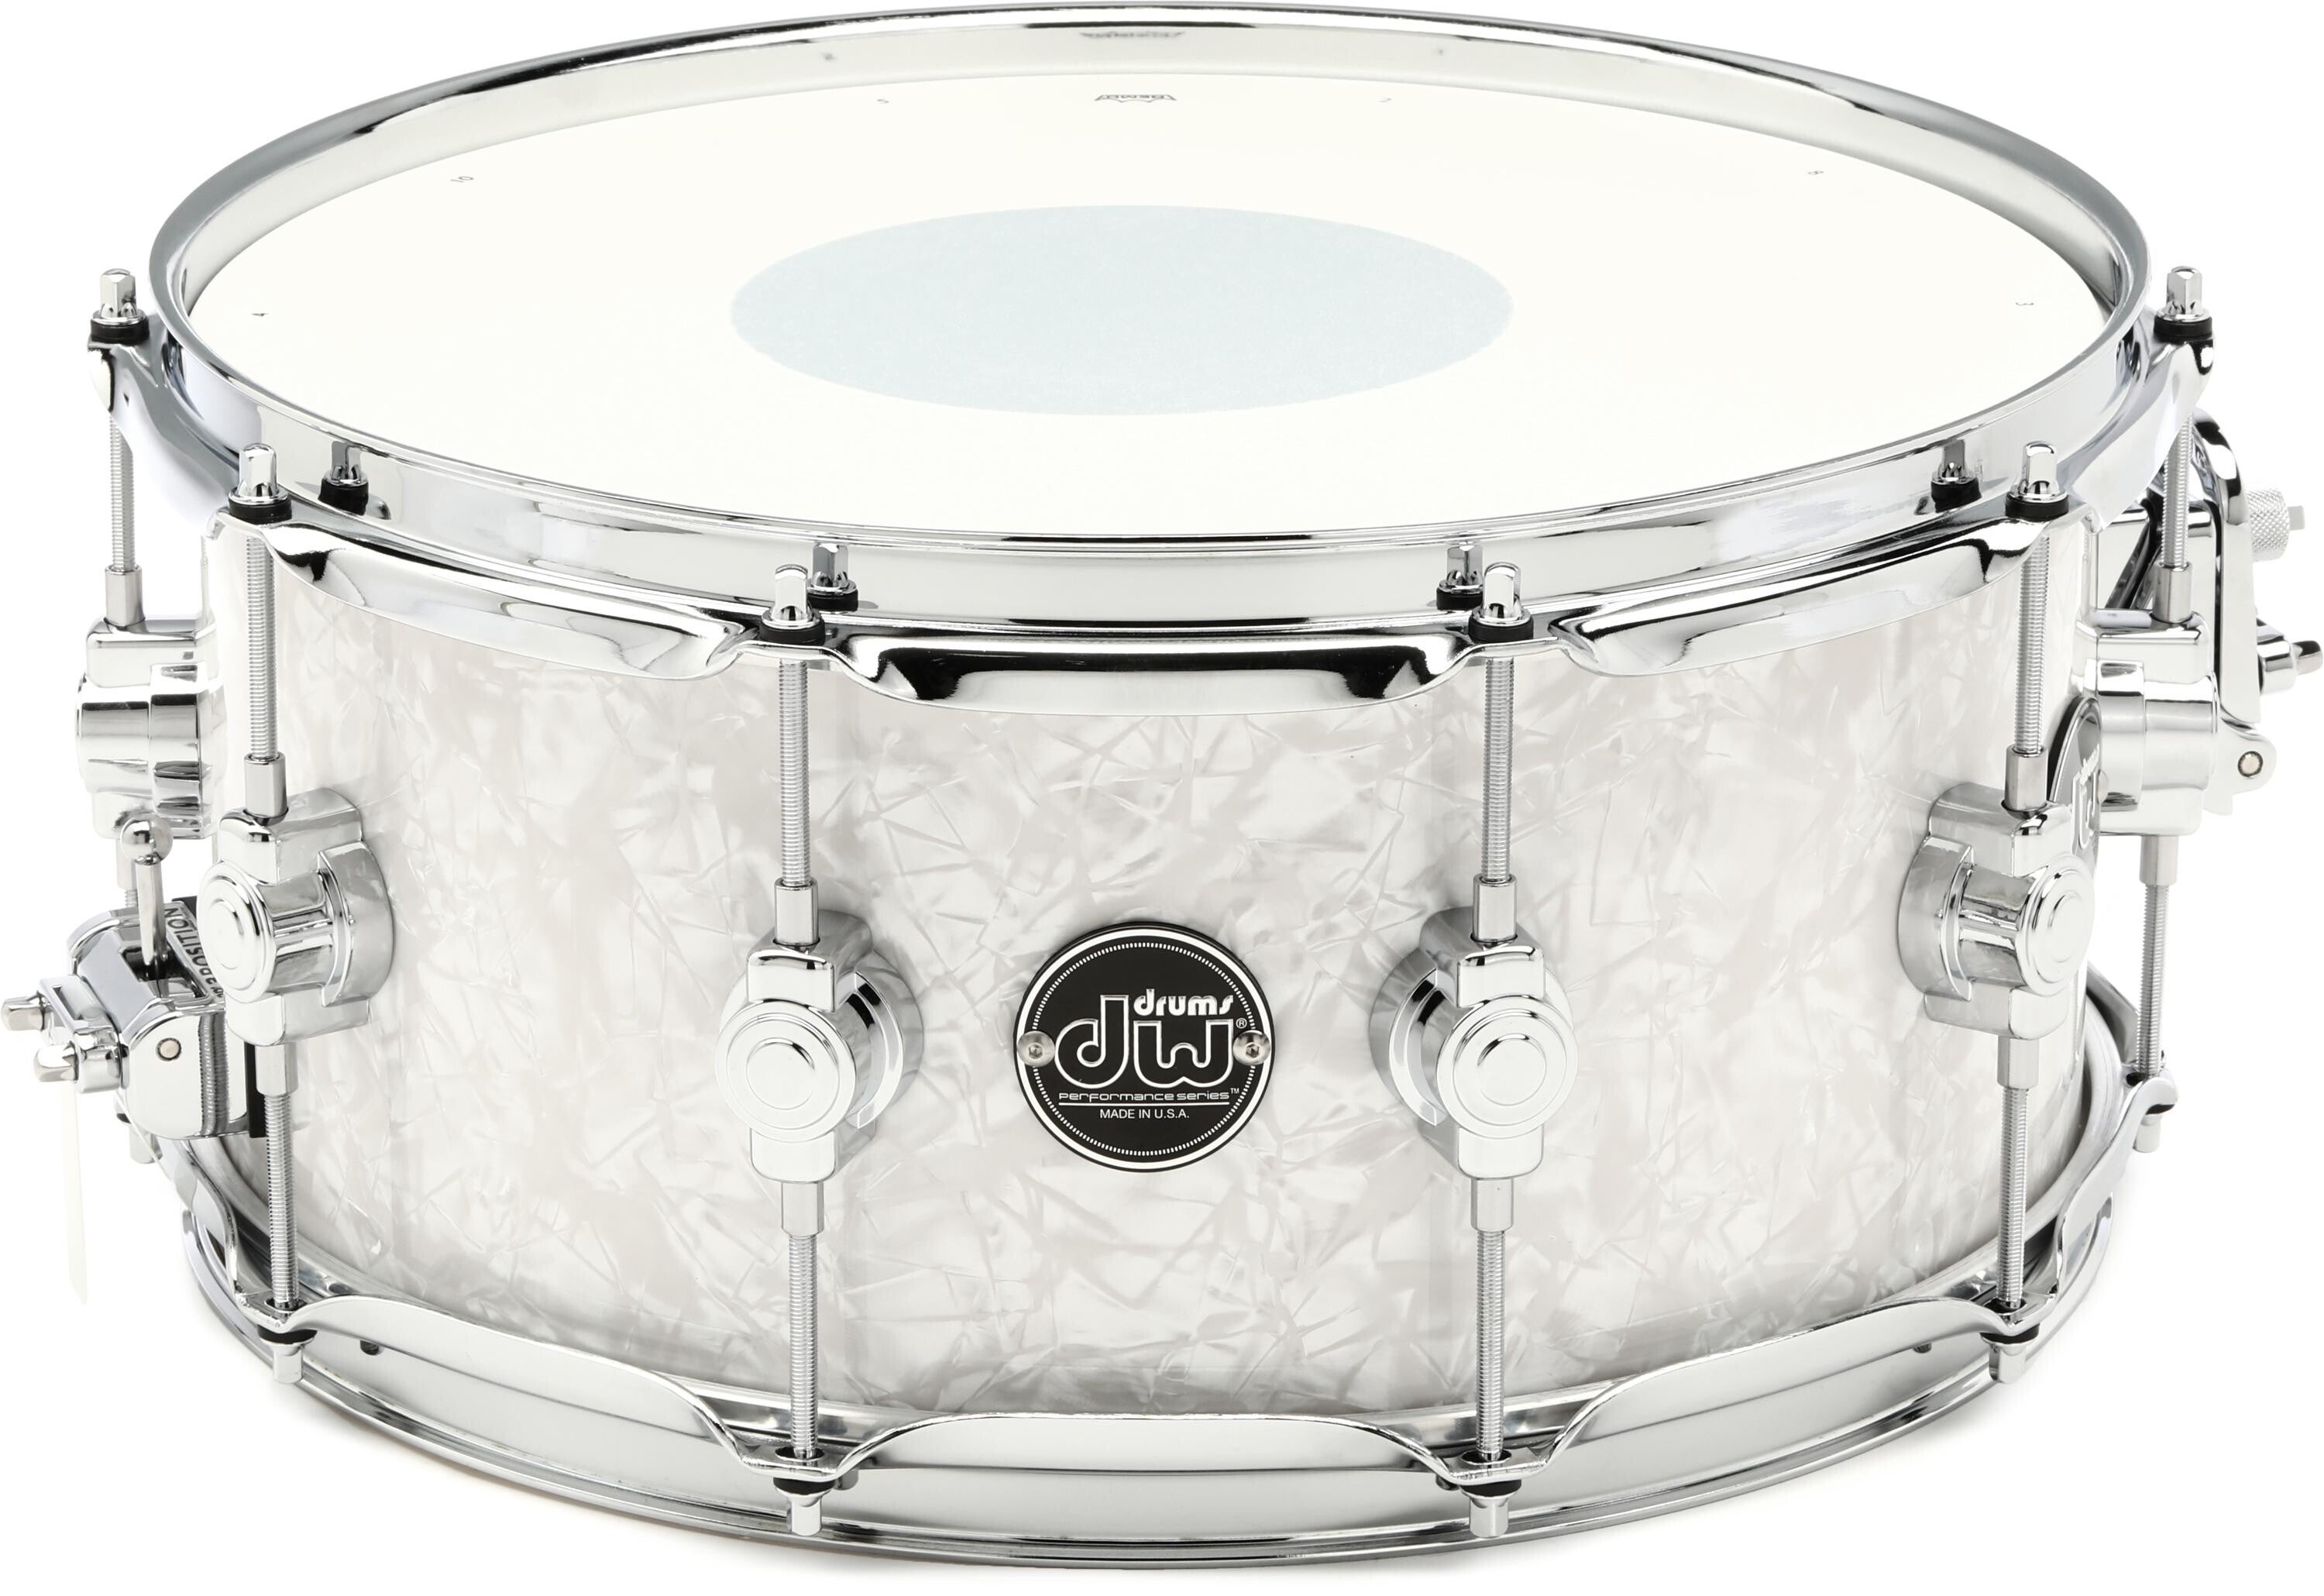 DW Performance Series Snare Drum - 6.5 x 14 inch - White Marine Finish Ply